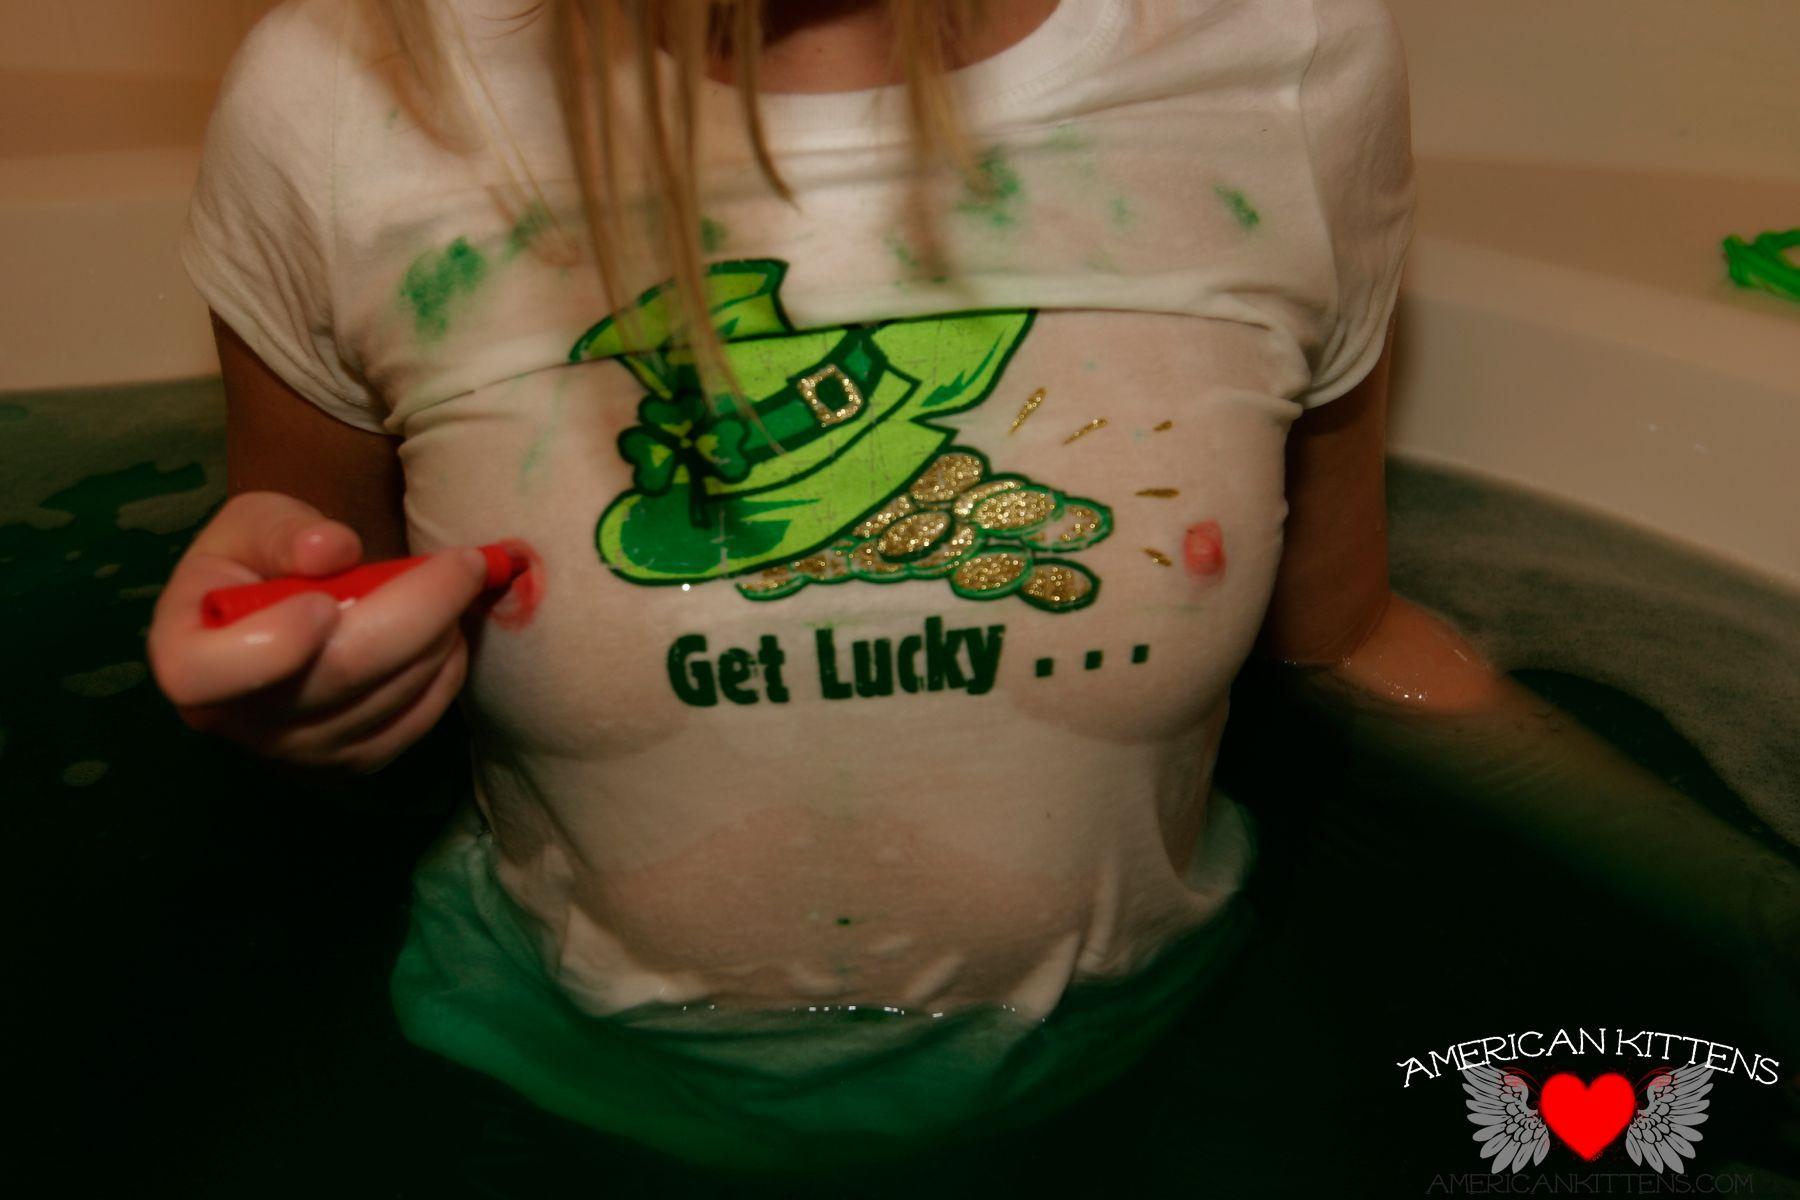 Pictures of Sarah Peachez celebrating St. Patty's in the bath tub #61943628